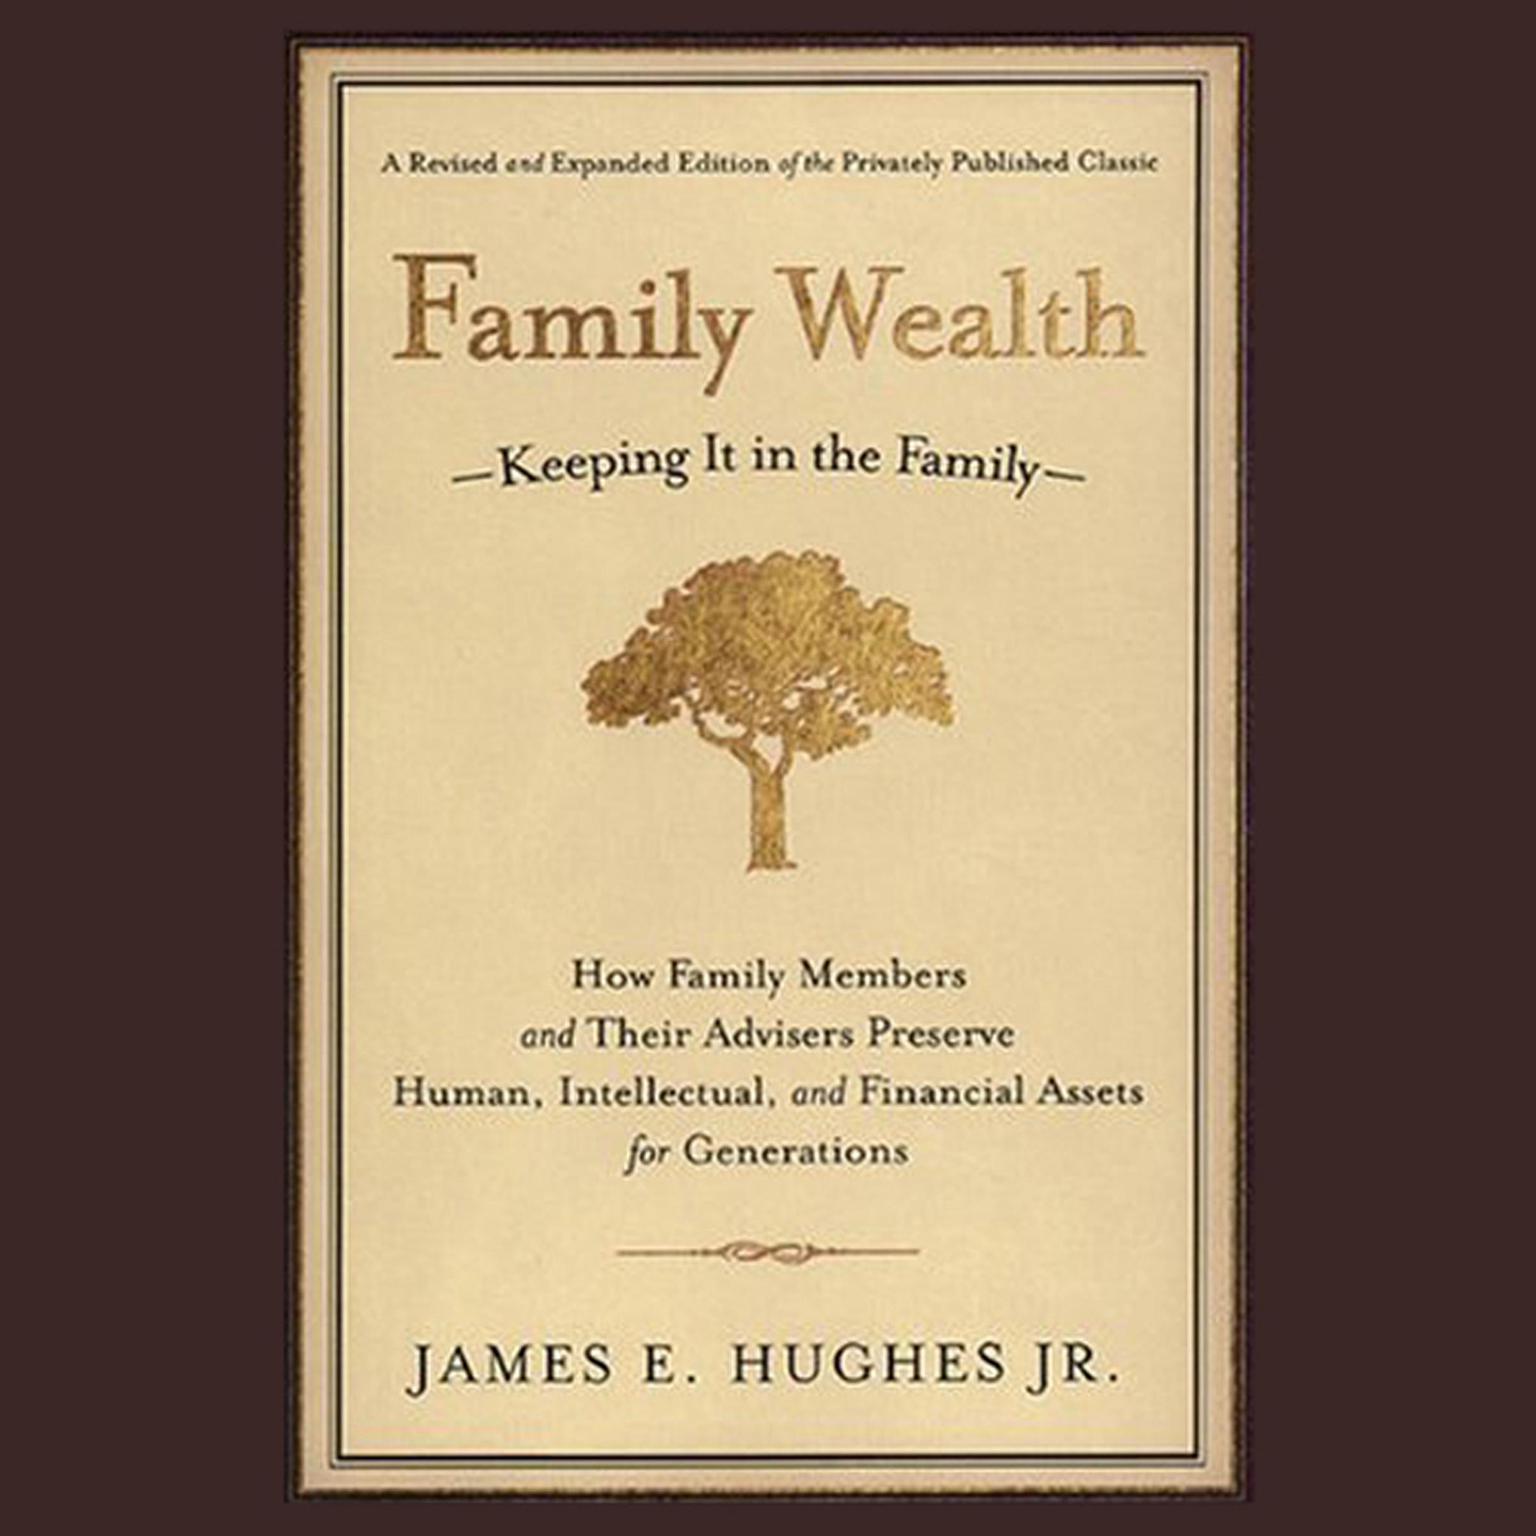 Family Wealth: Keeping It in the Family--How Family Members and Their Advisers Preserve Human, Intellectual, and Financial Assets for Generations Audiobook, by James E. Hughes